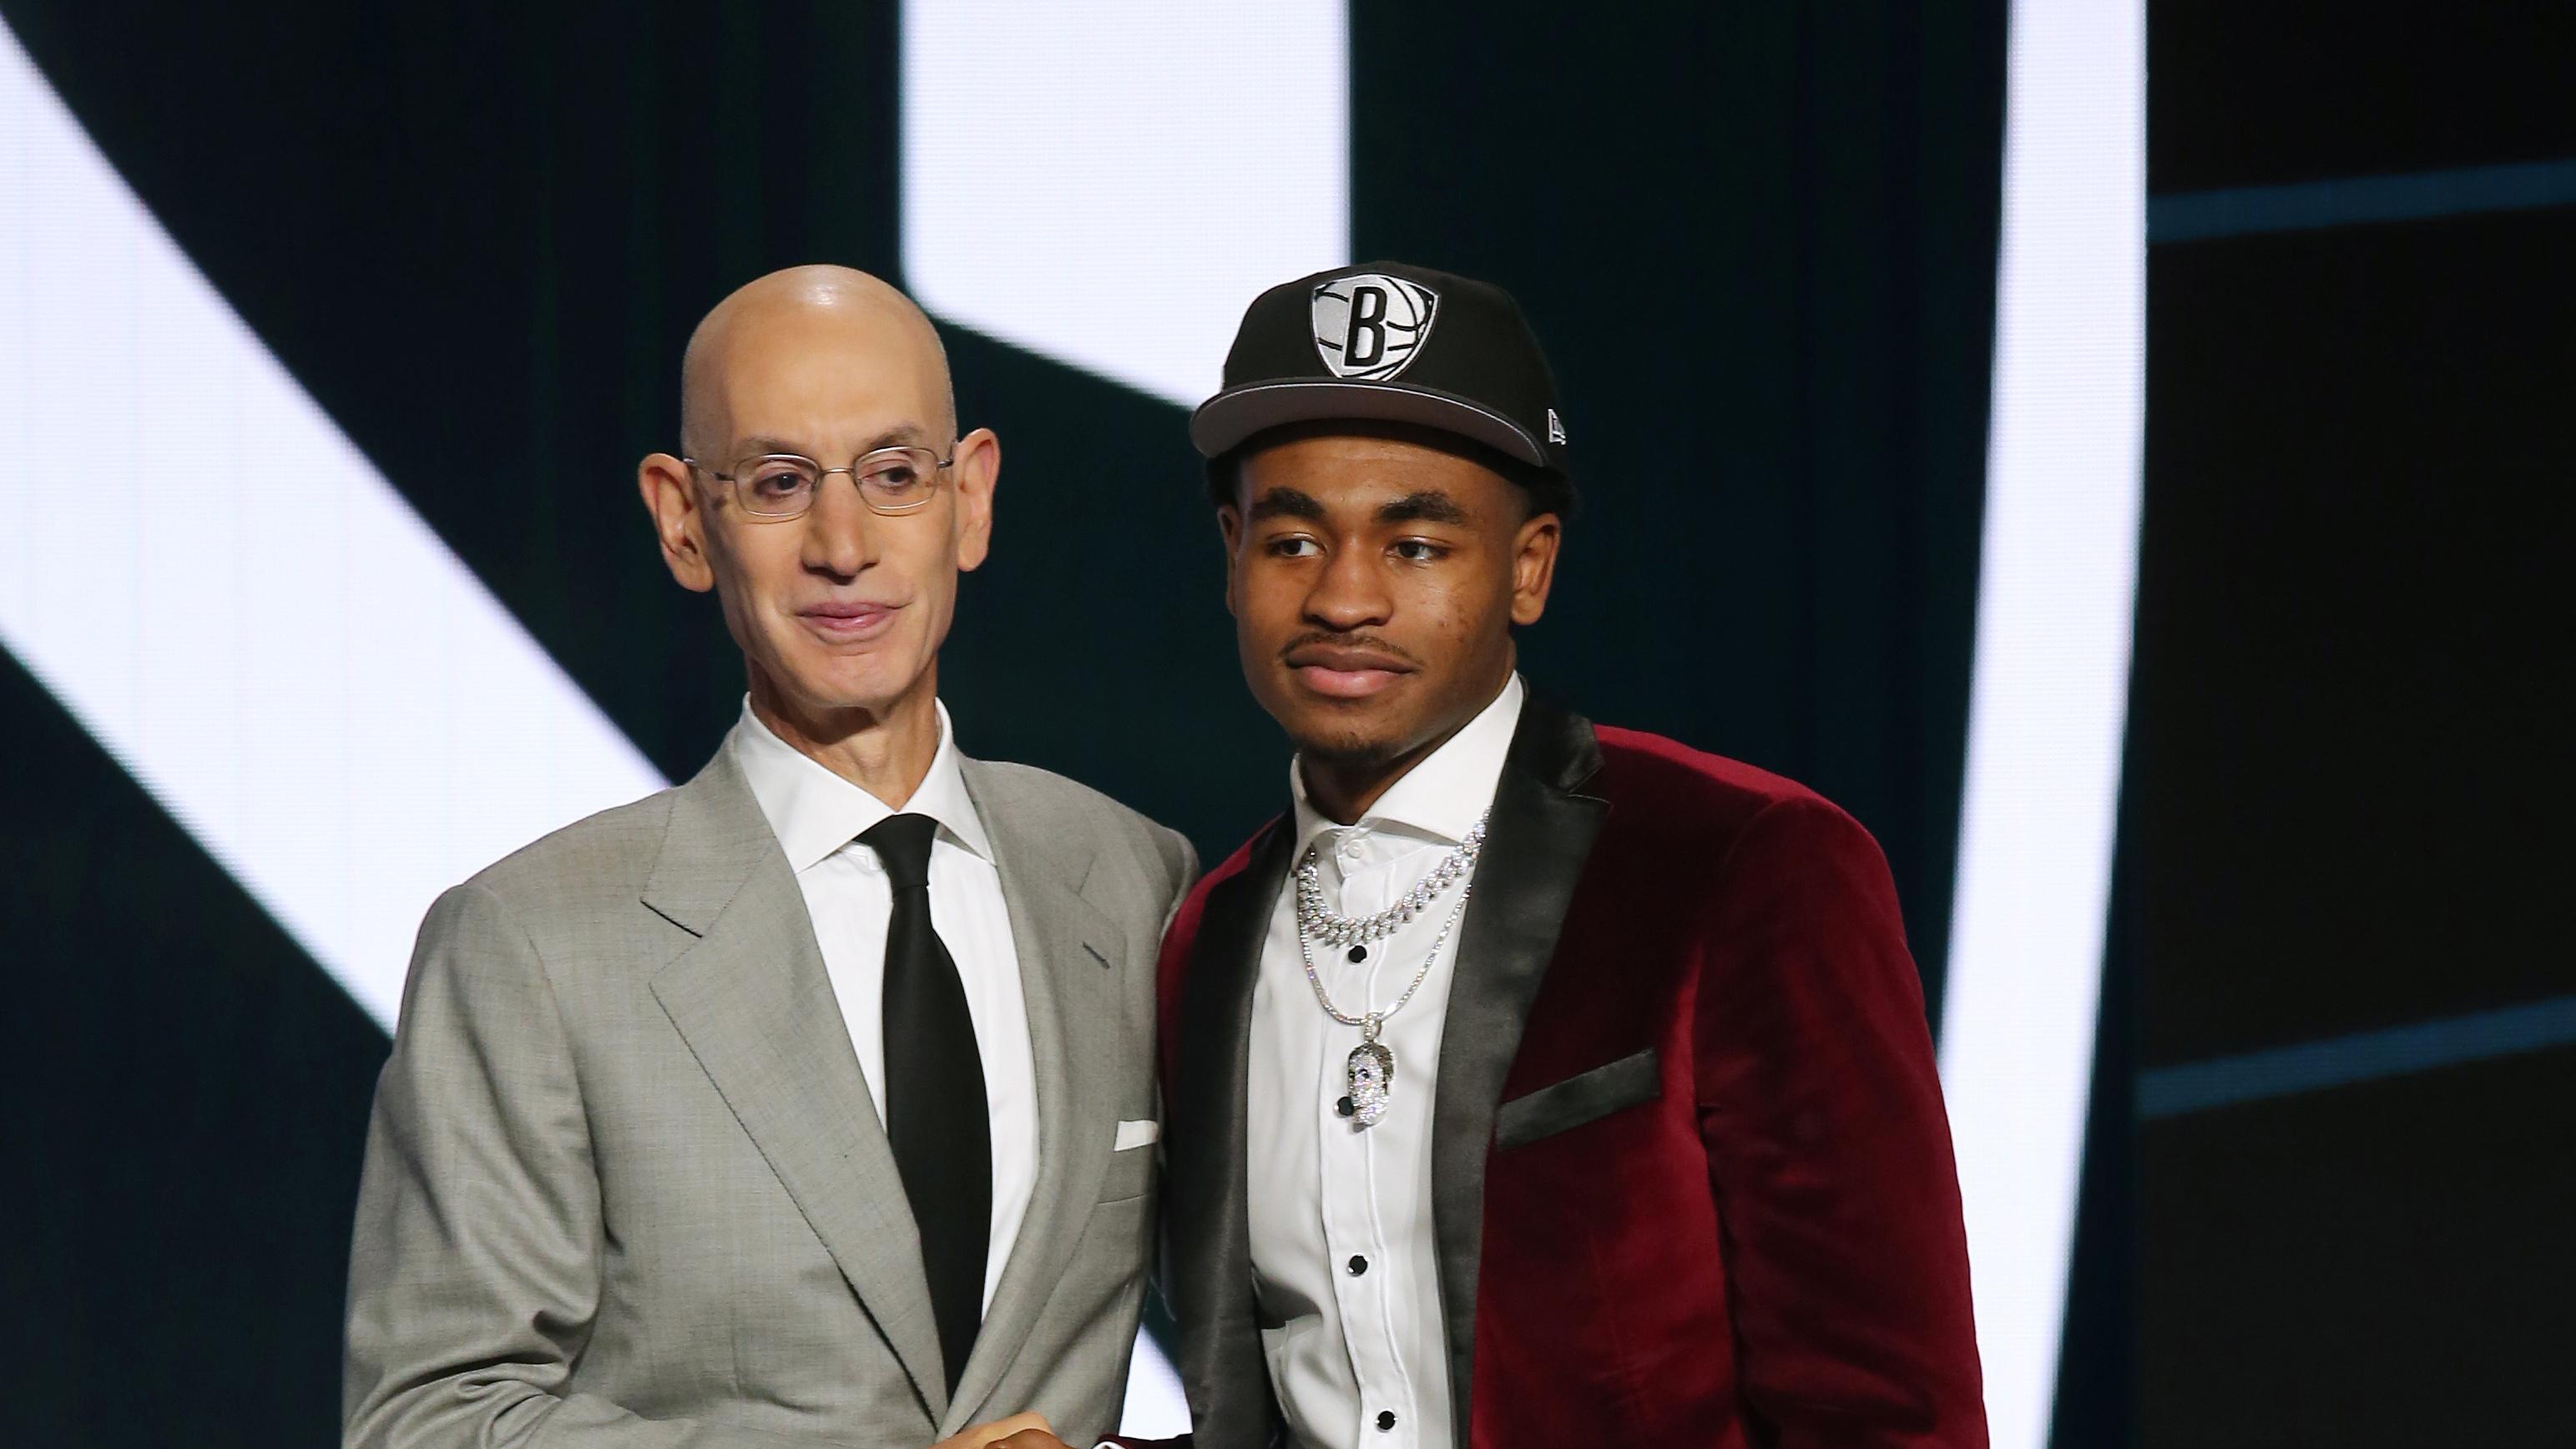 Cameron Thomas (LSU) poses with NBA commissioner Adam Silver after being selected as the number twenty-seven overall pick by the Brooklyn Nets in the first round of the 2021 NBA Draft / Brad Penner-USA TODAY Sports